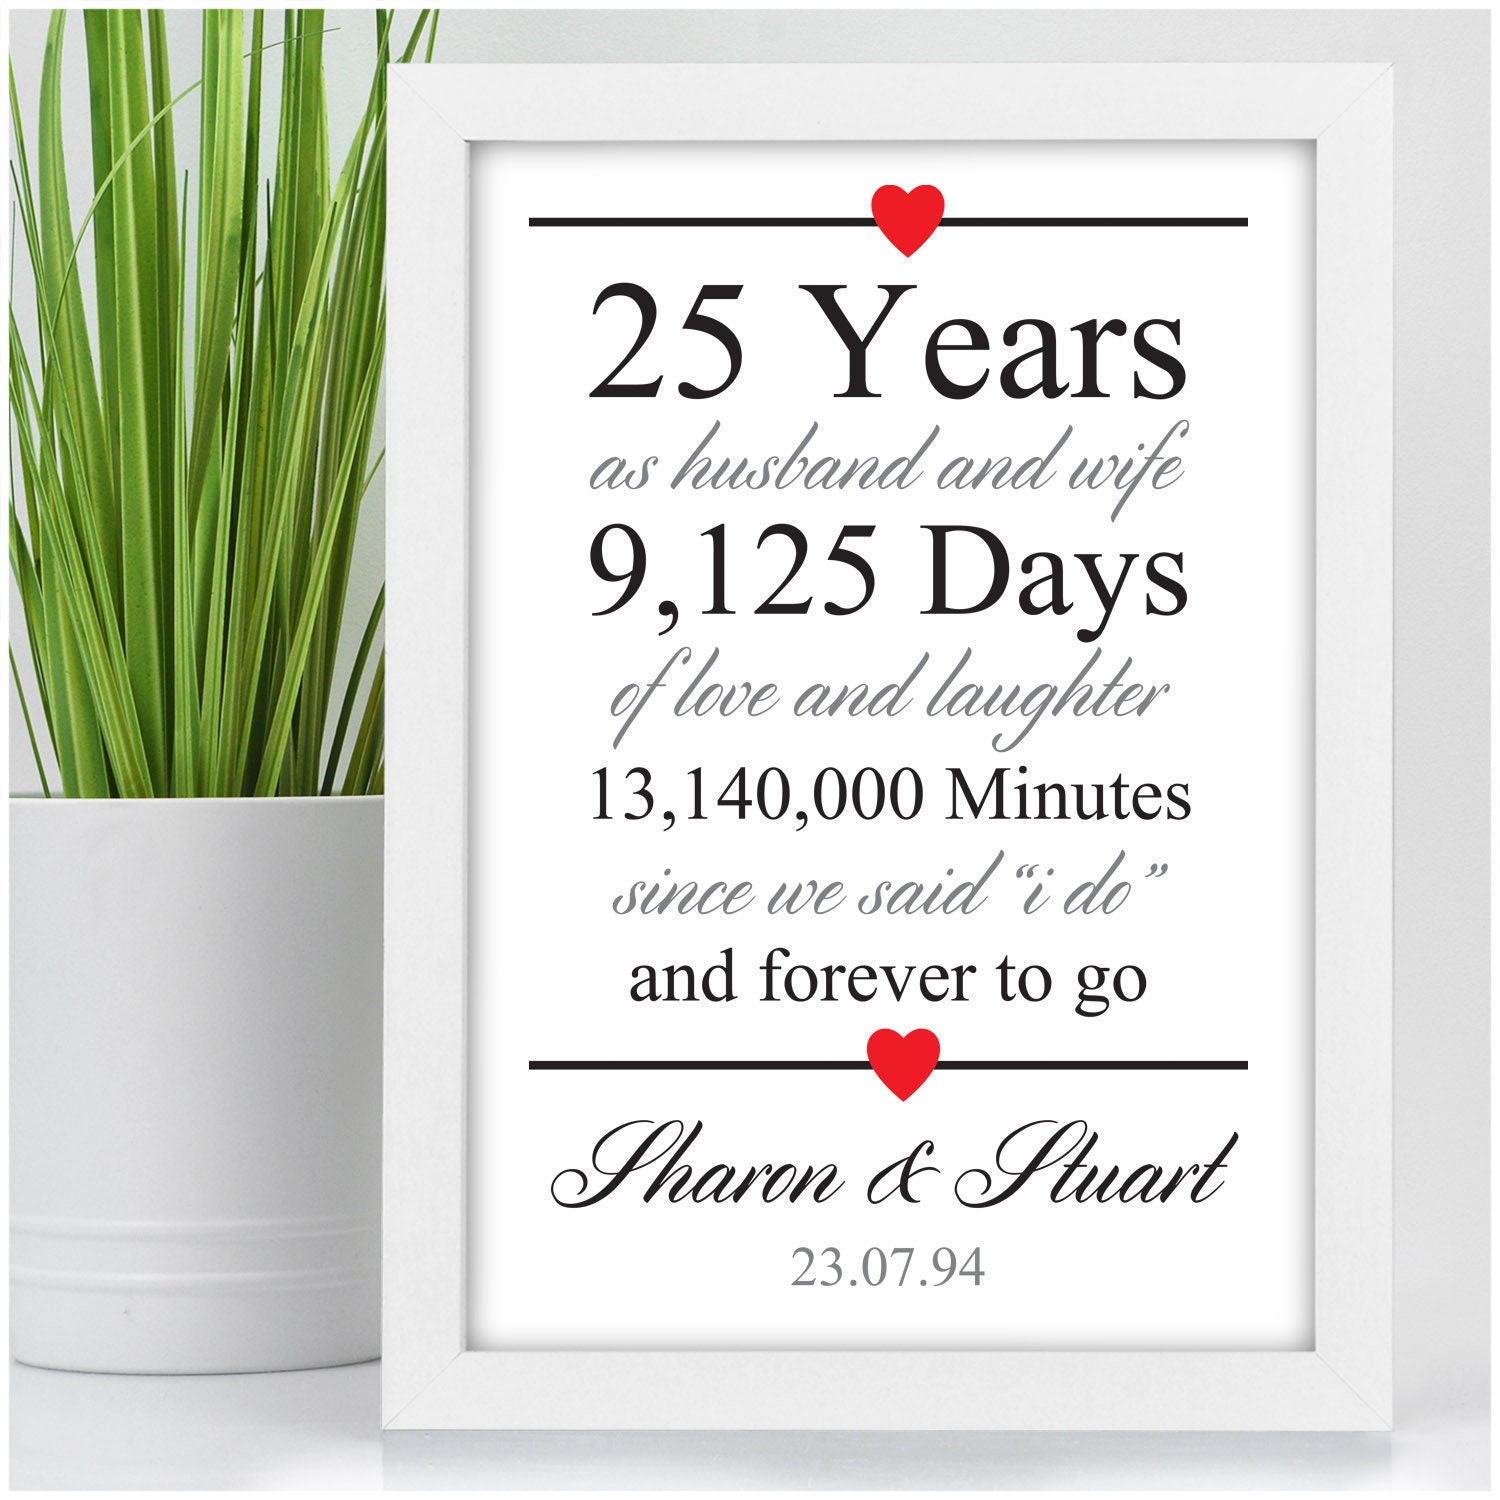 25 Years Married Personalised Silver Wedding Anniversary Gifts Couple Him Her Twenty Five Years Acrylic Heart Block With Grey Bag 25th Wedding Anniversary Gifts Husband Wife Parents Mum and Dad